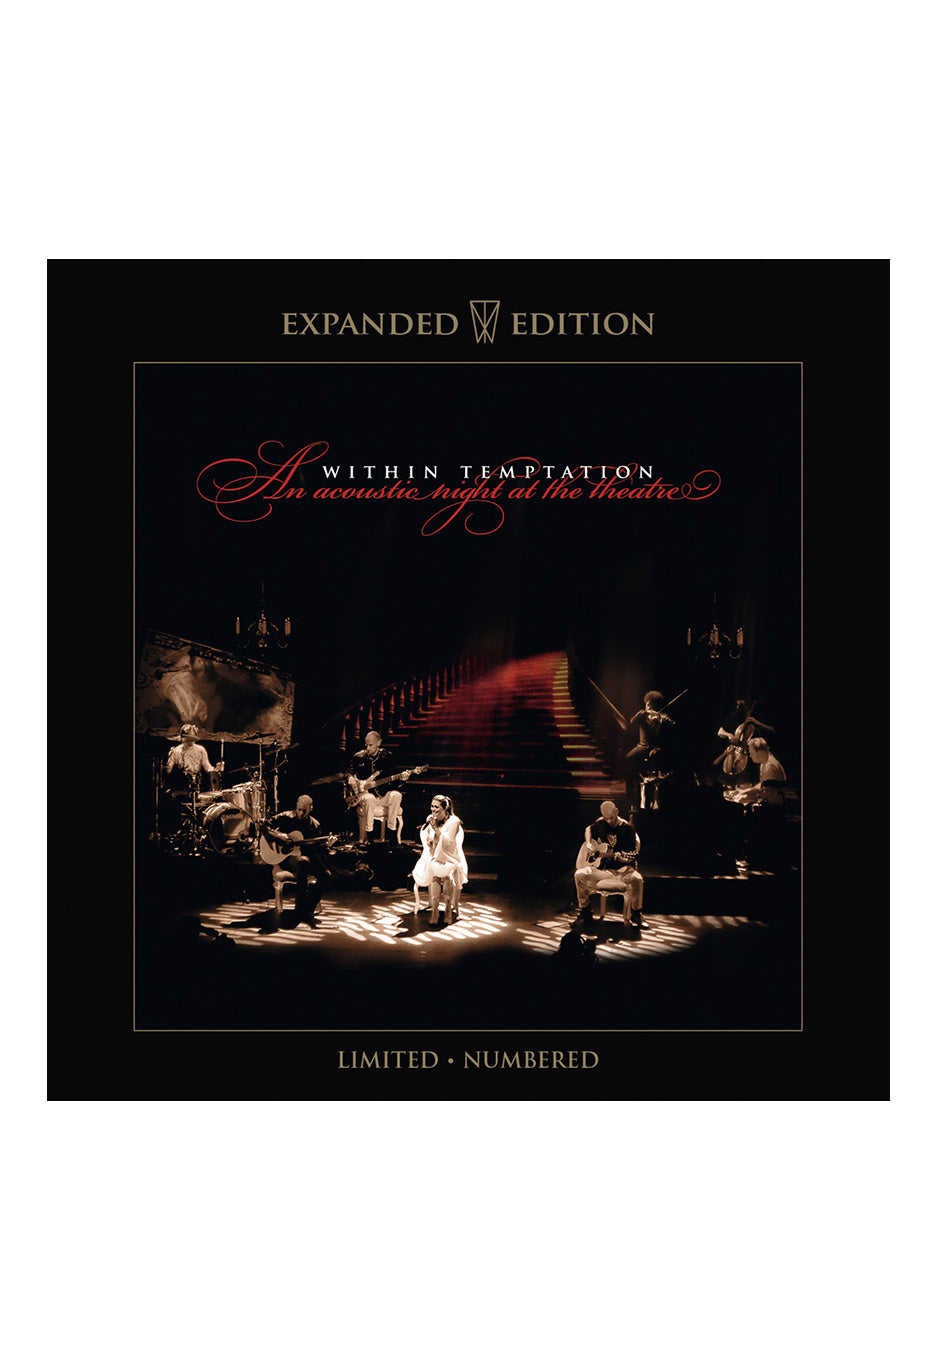 Within Temptation - An Acoustic Night At The Theatre Expanded Edition - CD